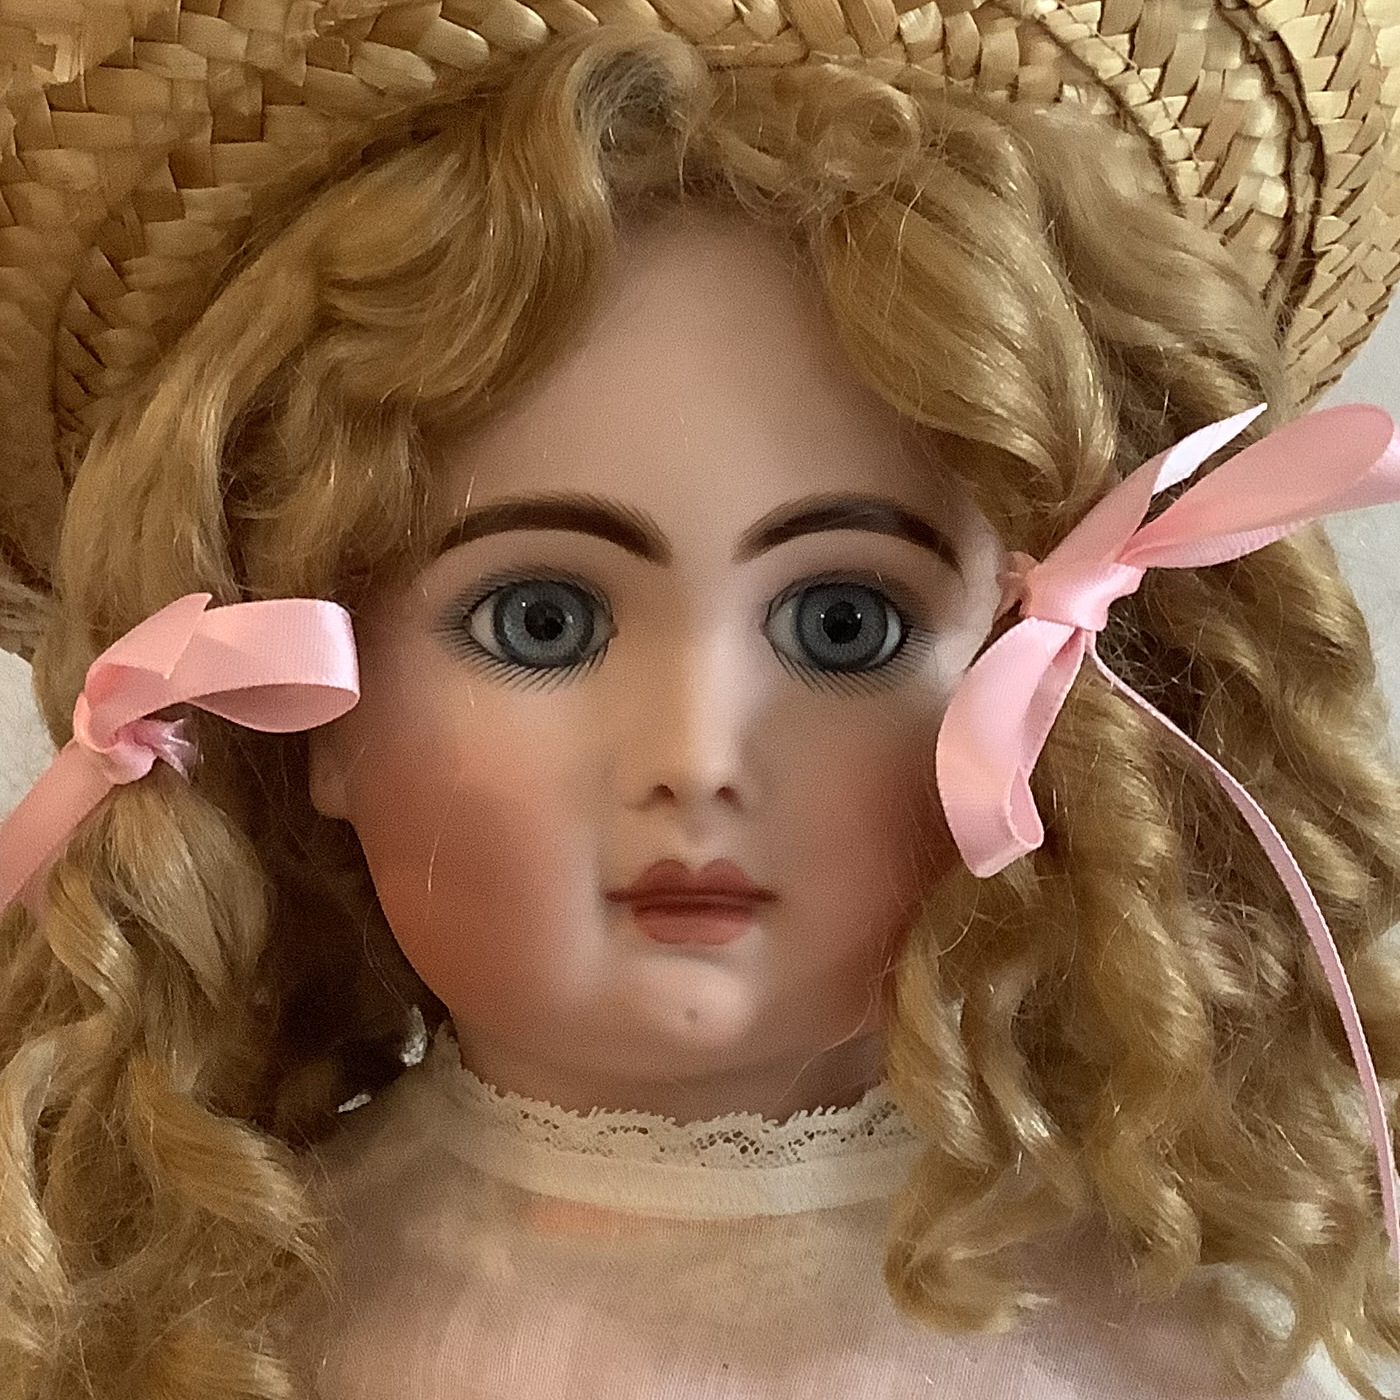 Close-up of reproduction doll's face